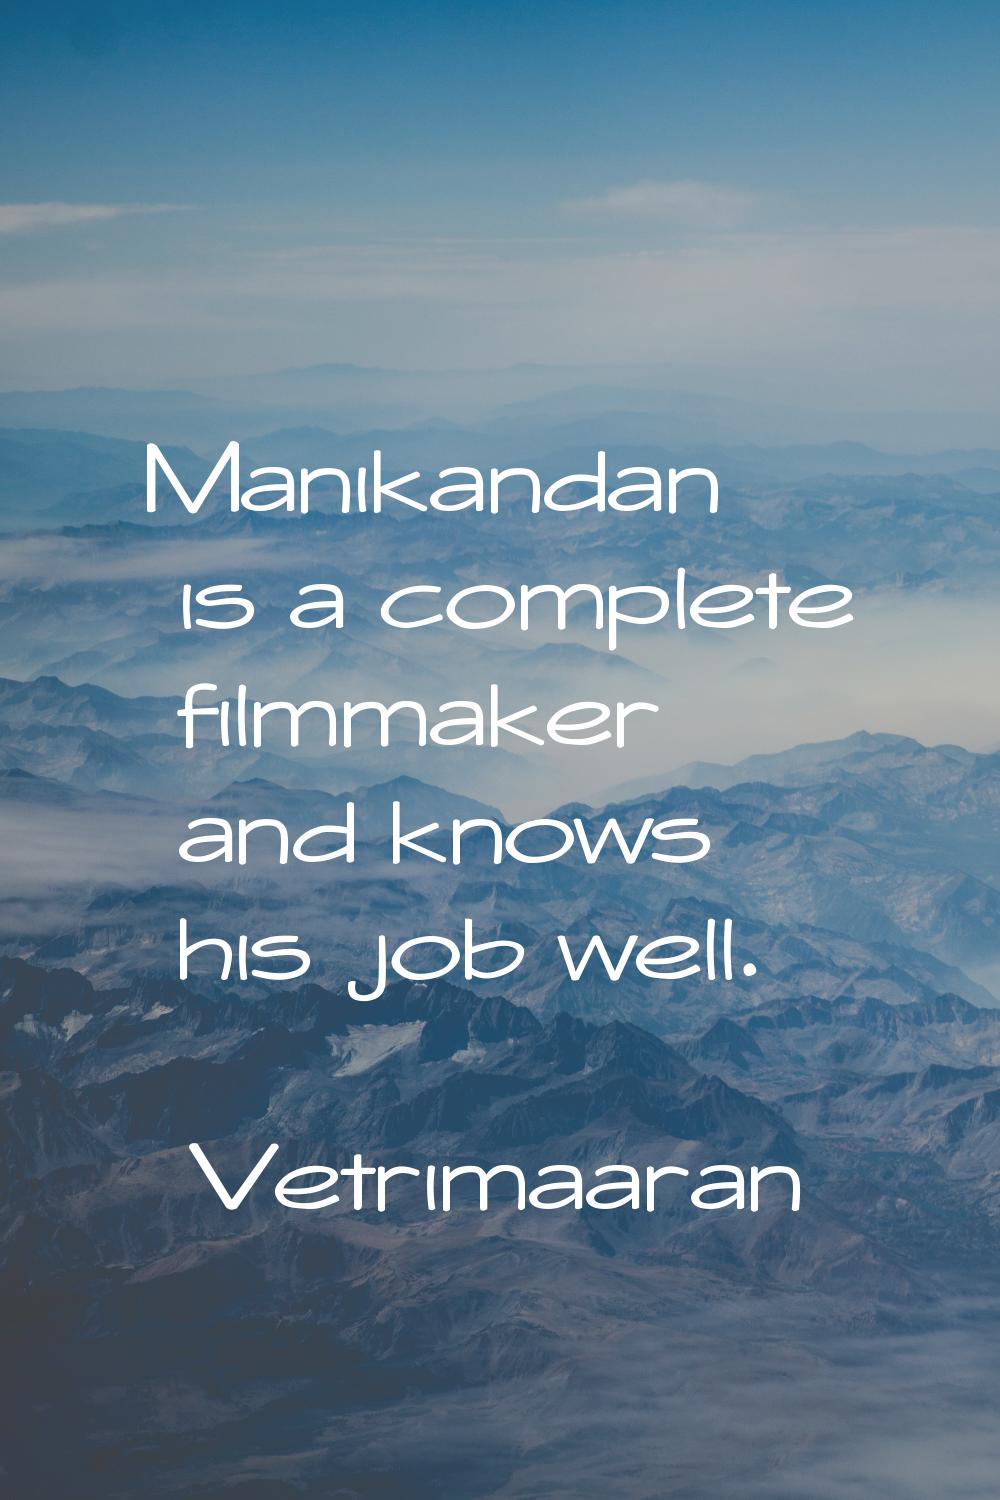 Manikandan is a complete filmmaker and knows his job well.